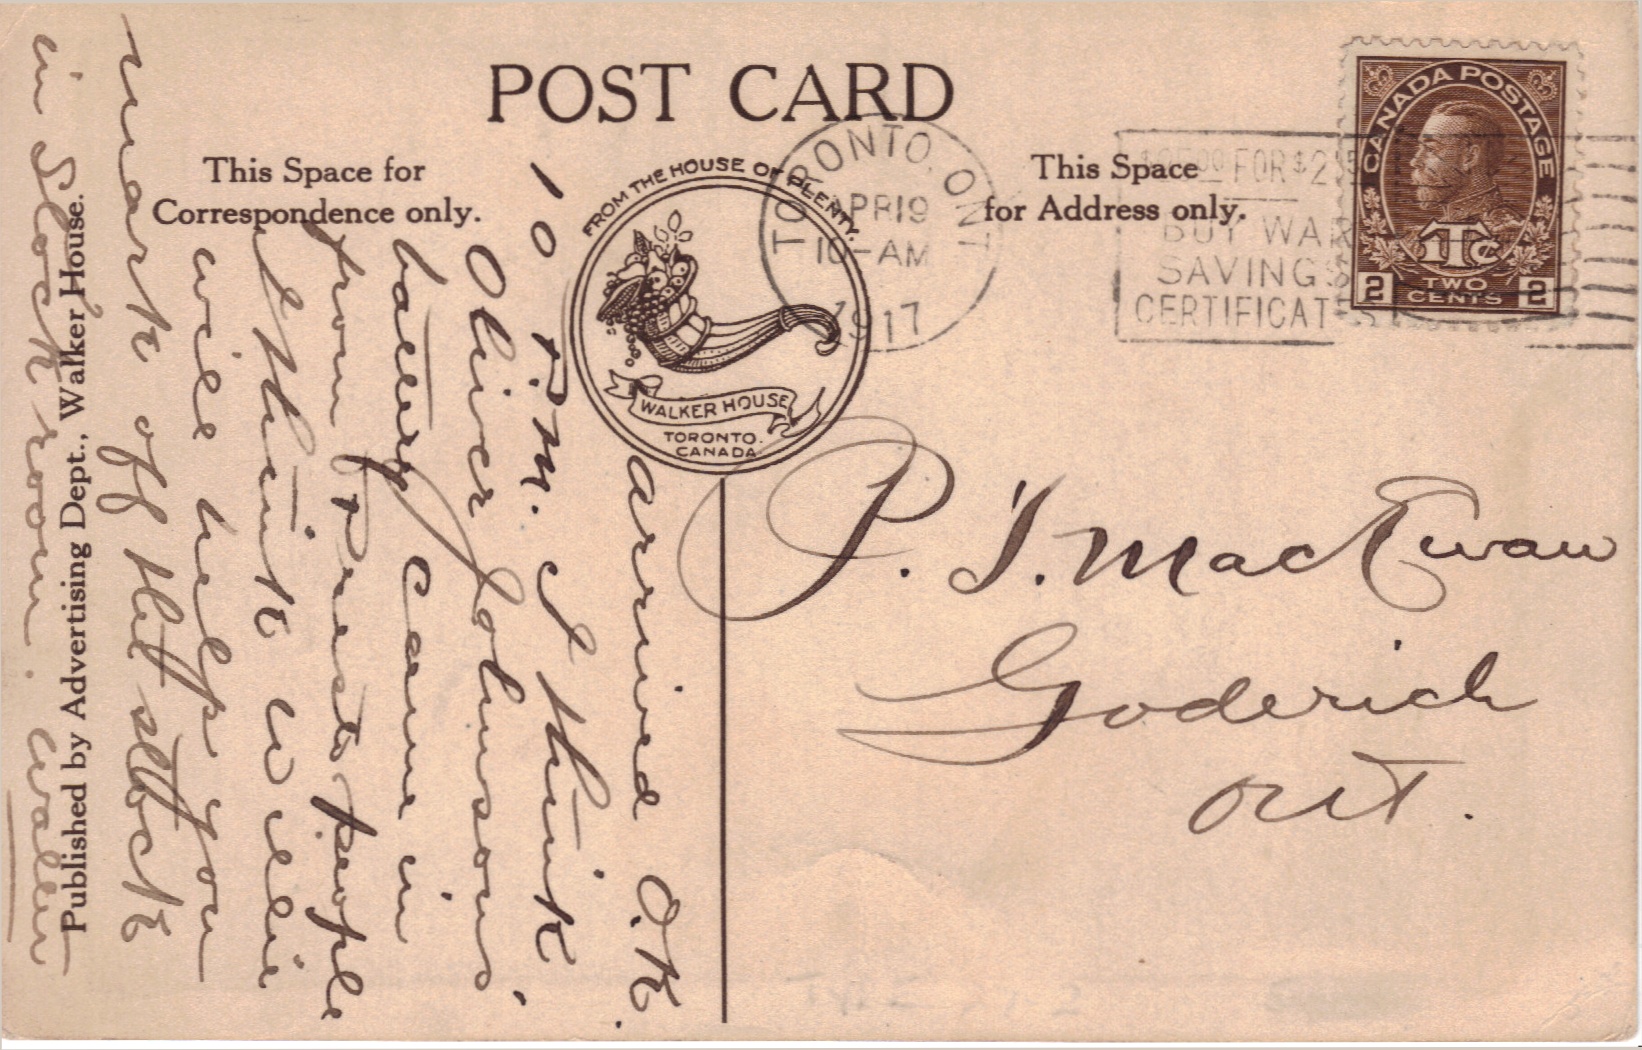 hand written postcard from WWII with Canadian stamp